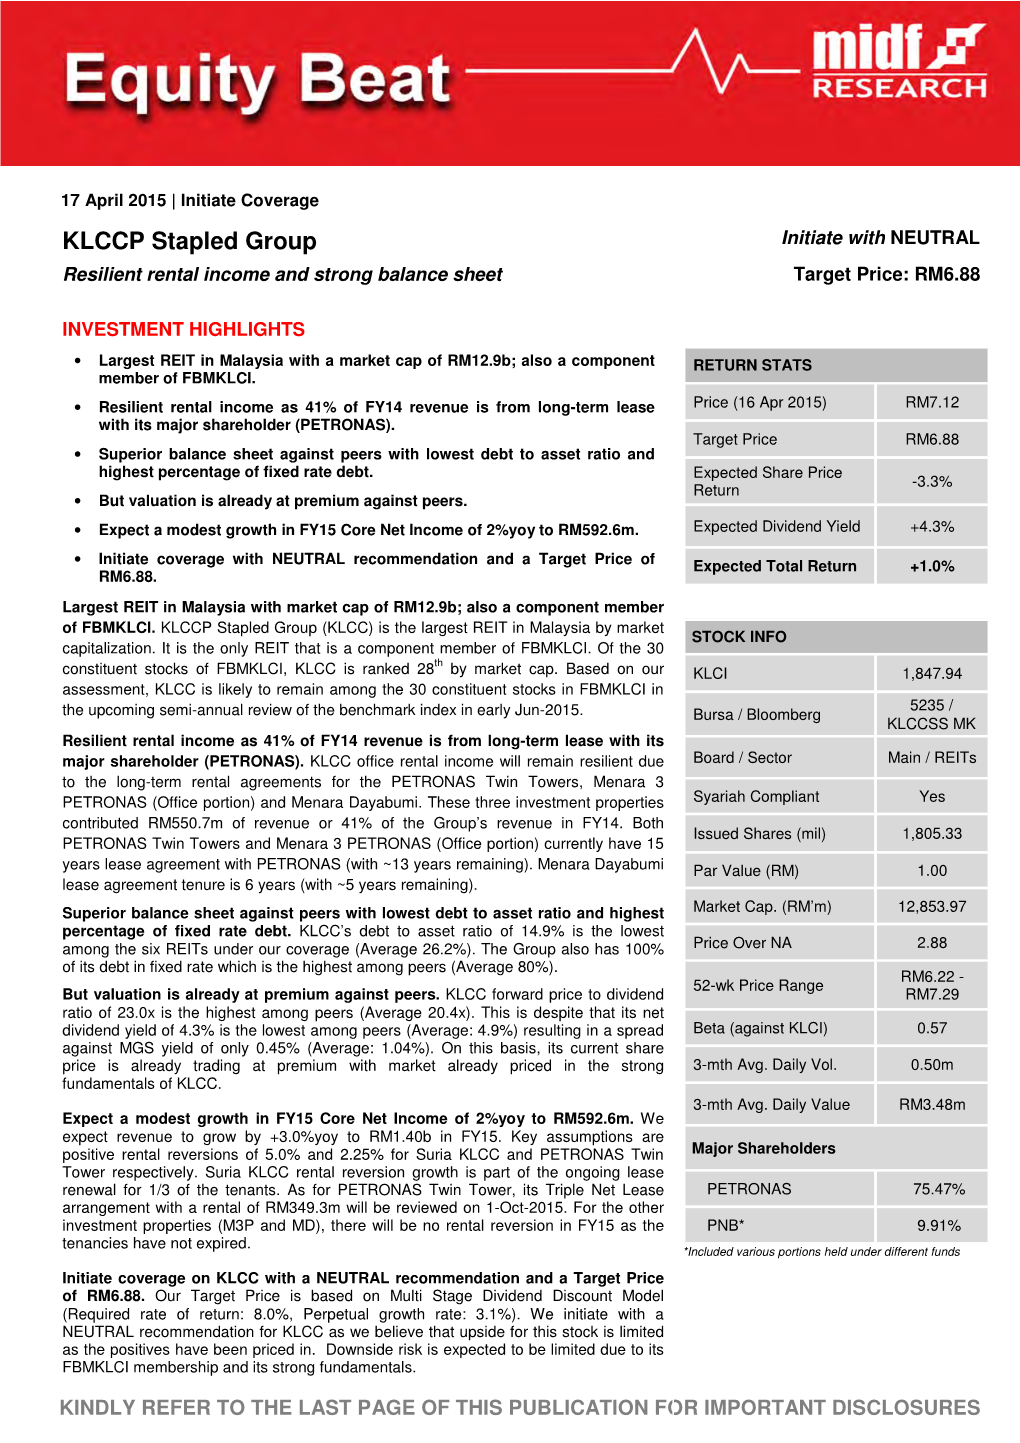 KLCCP Stapled Group Initiate with NEUTRAL Resilient Rental Income and Strong Balance Sheet Target Price: RM6.88